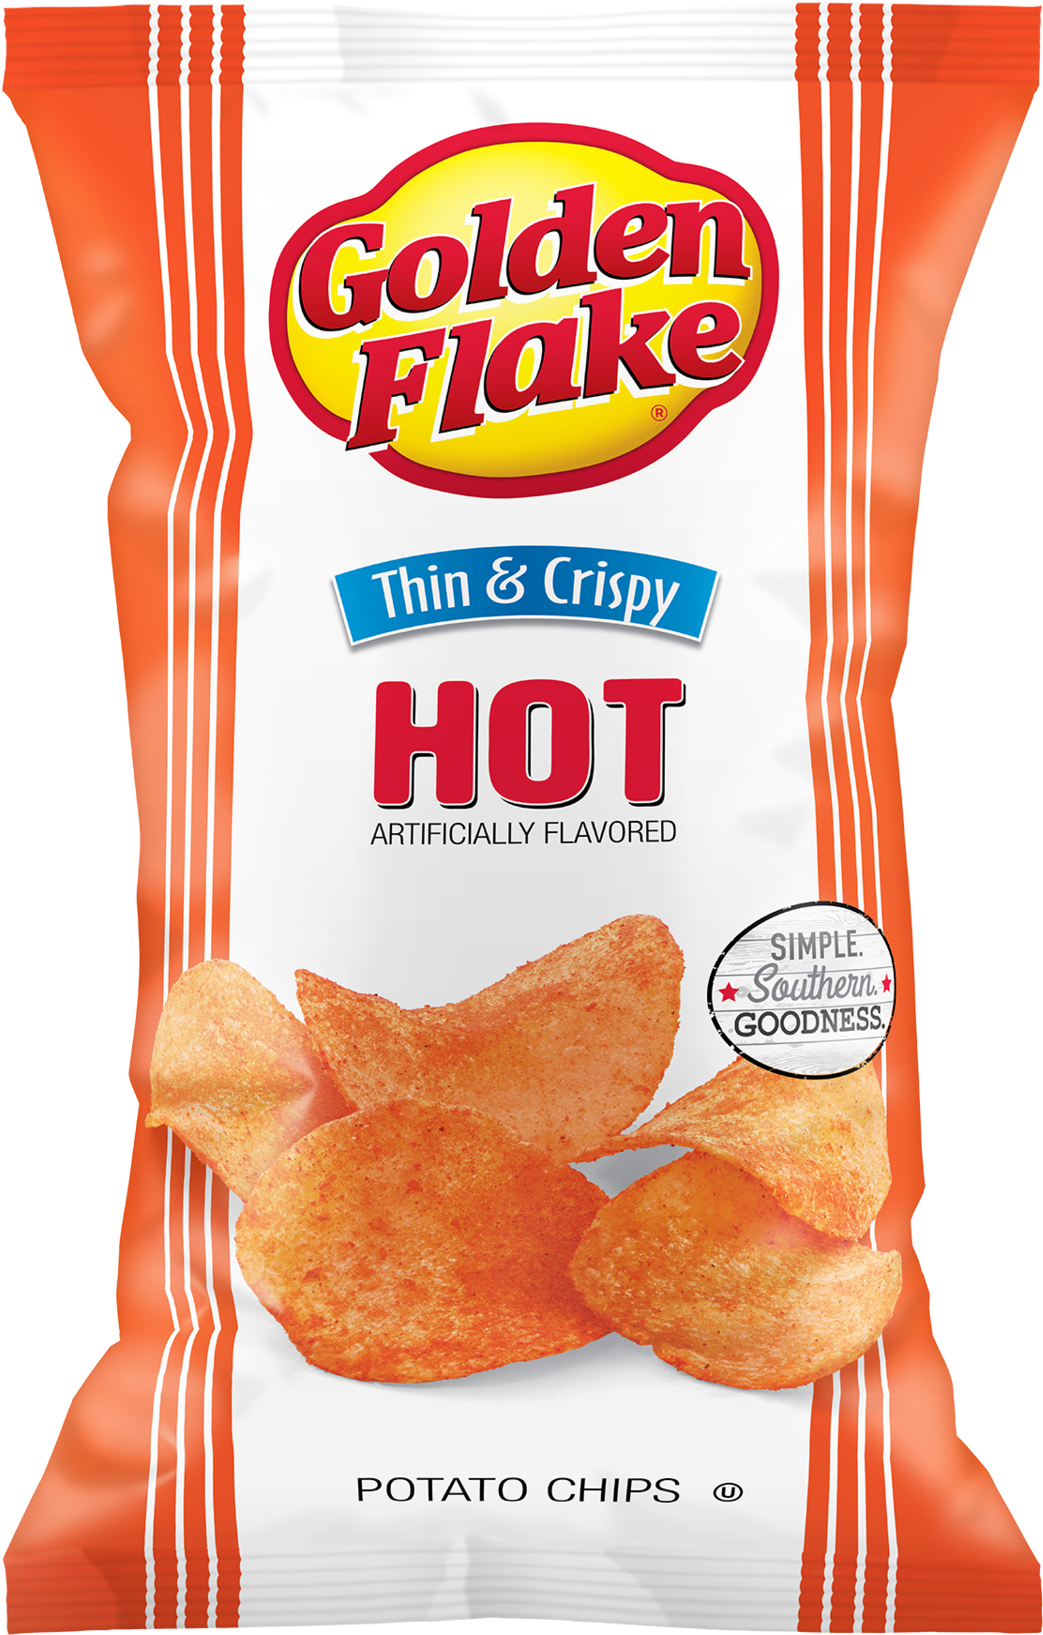 Golden Flake Hot Thin Crispy Chips Package PNG